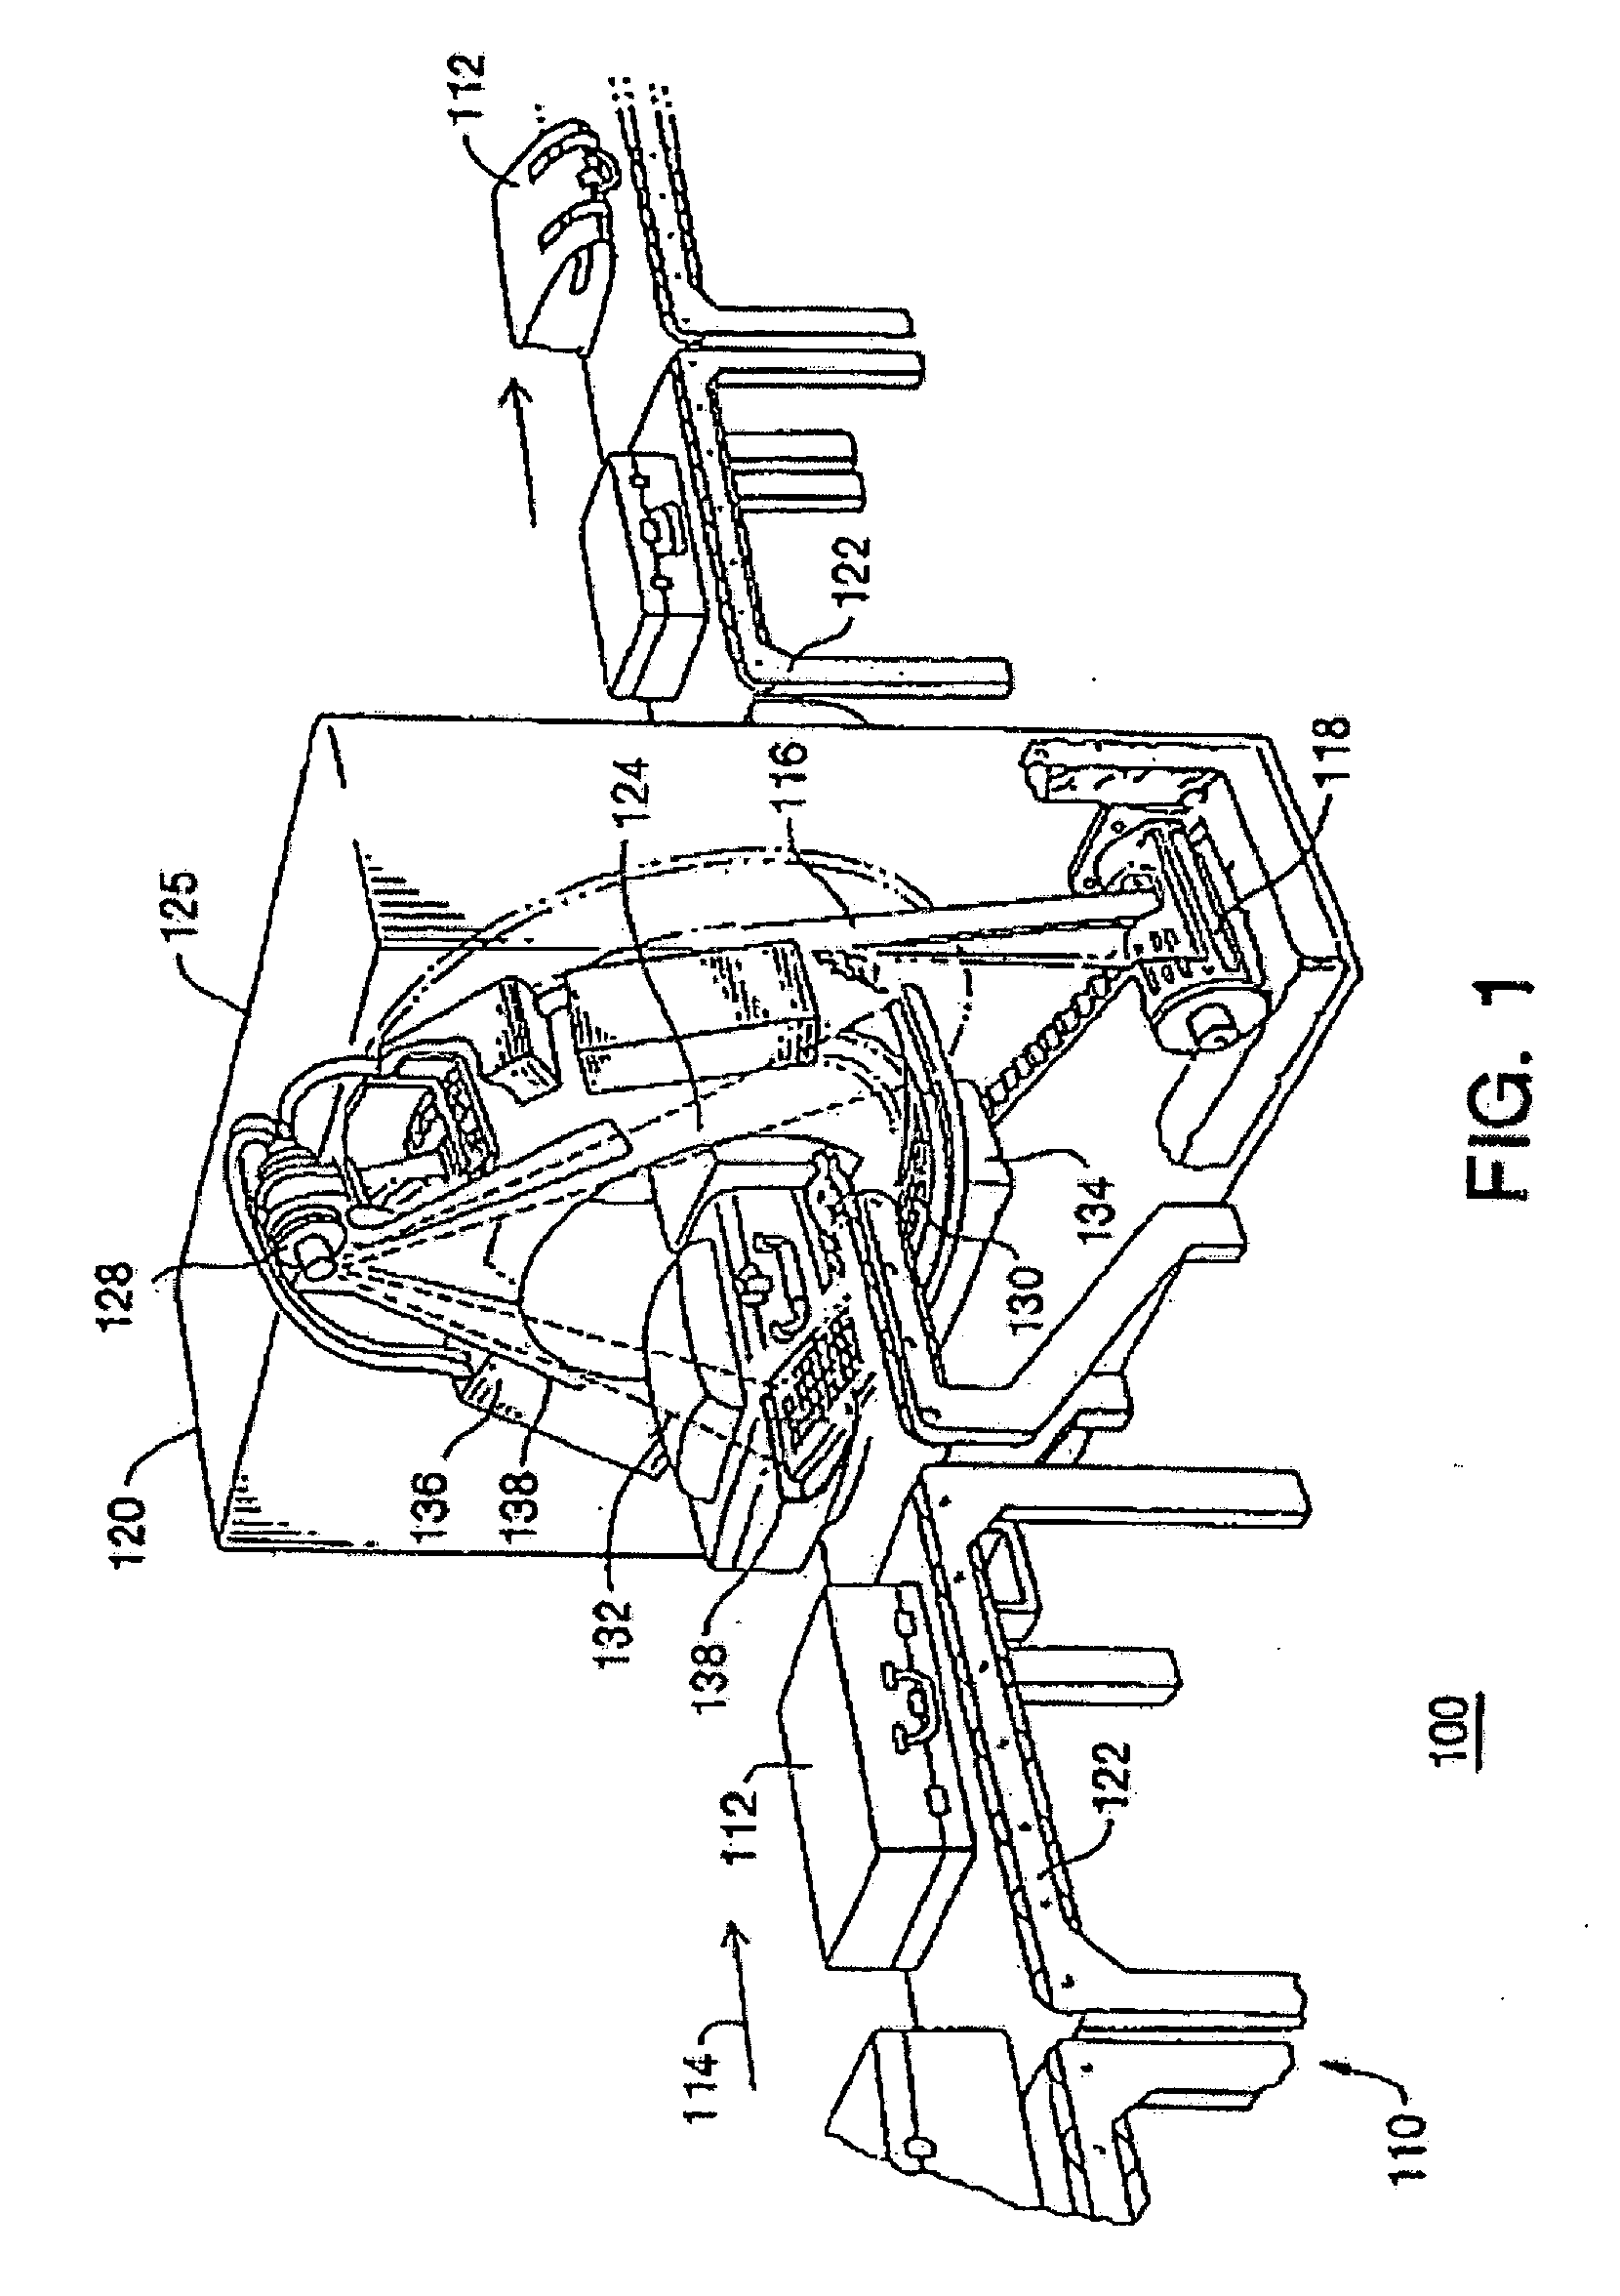 Method of and system for classifying objects using histogram segment features of multi-energy computed tomography images